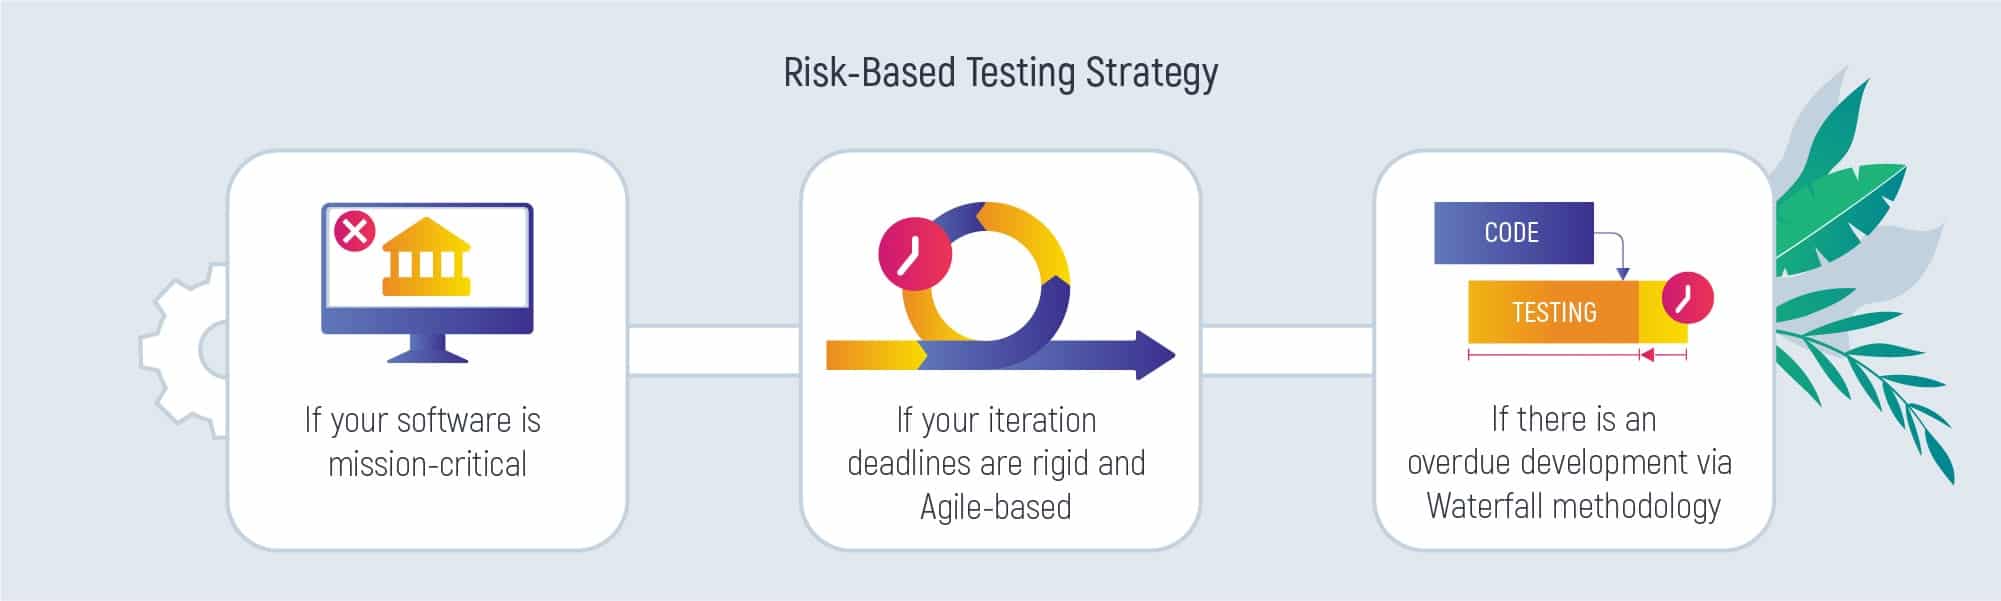 Risk-Based Testing Approach: Benefits and Use Cases